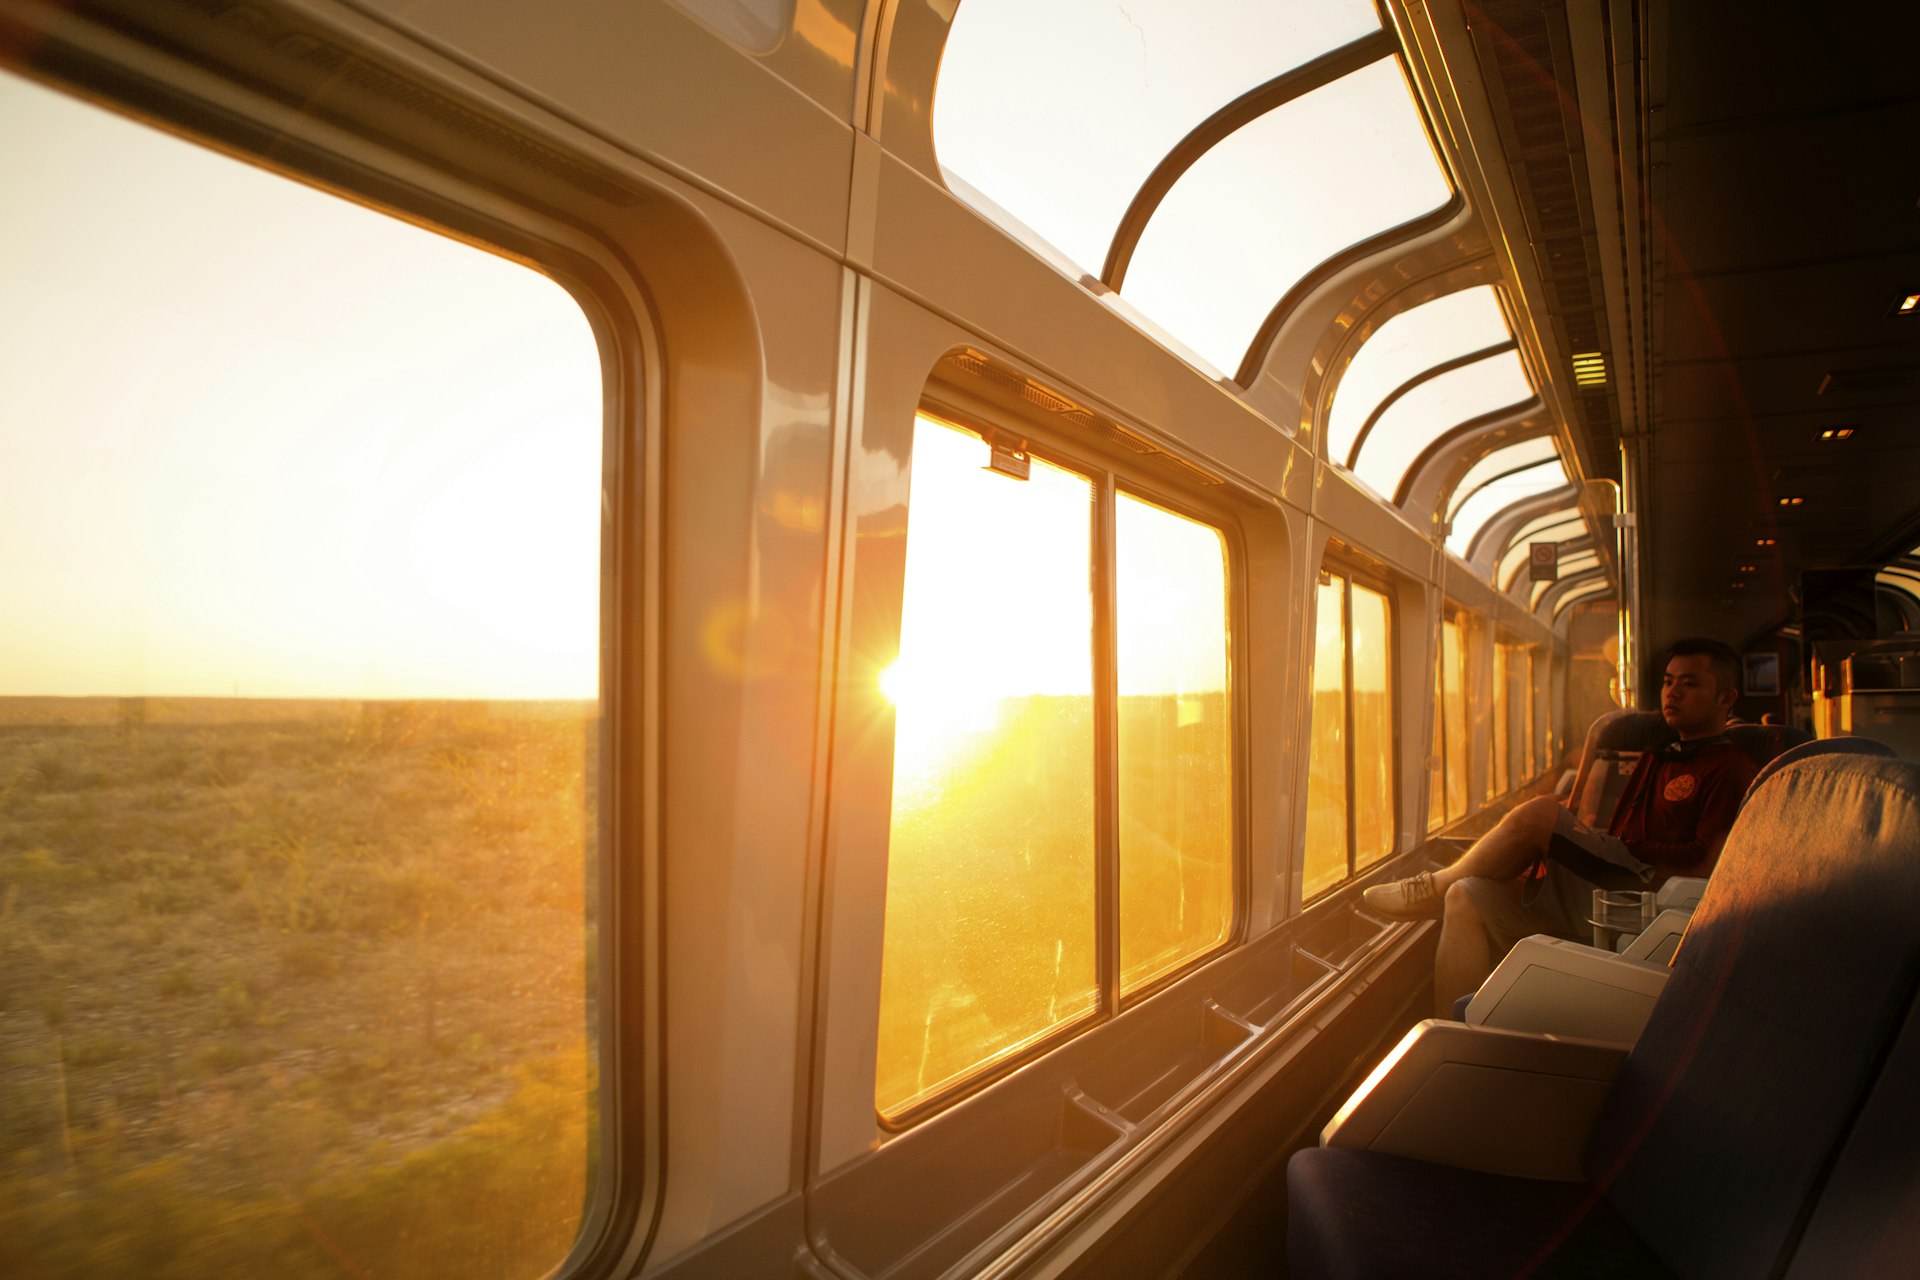 A young man watches the sun rise over the Texas landscape through the large windows of the Amtrack train travelling from San Antonio to Alpine.